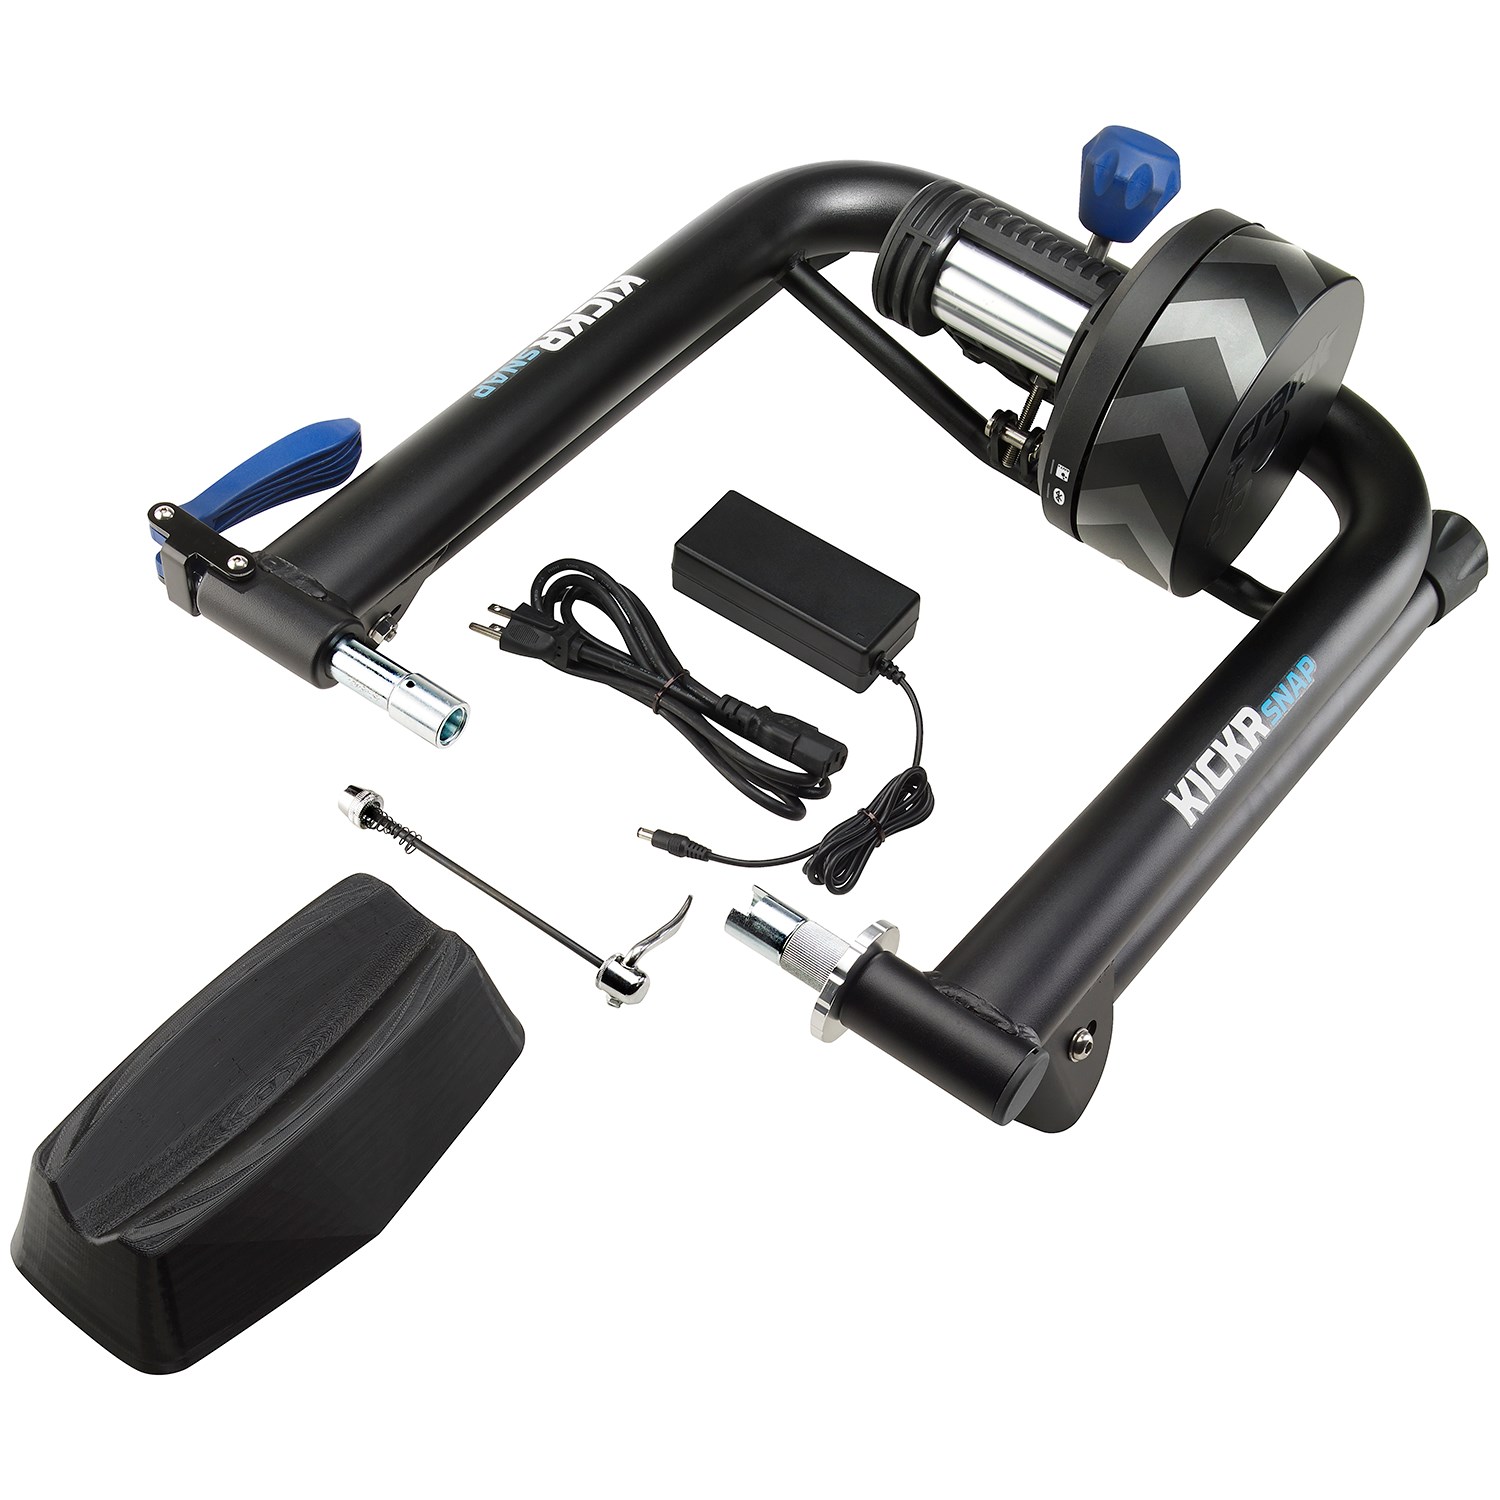 kickr snap bike trainer review